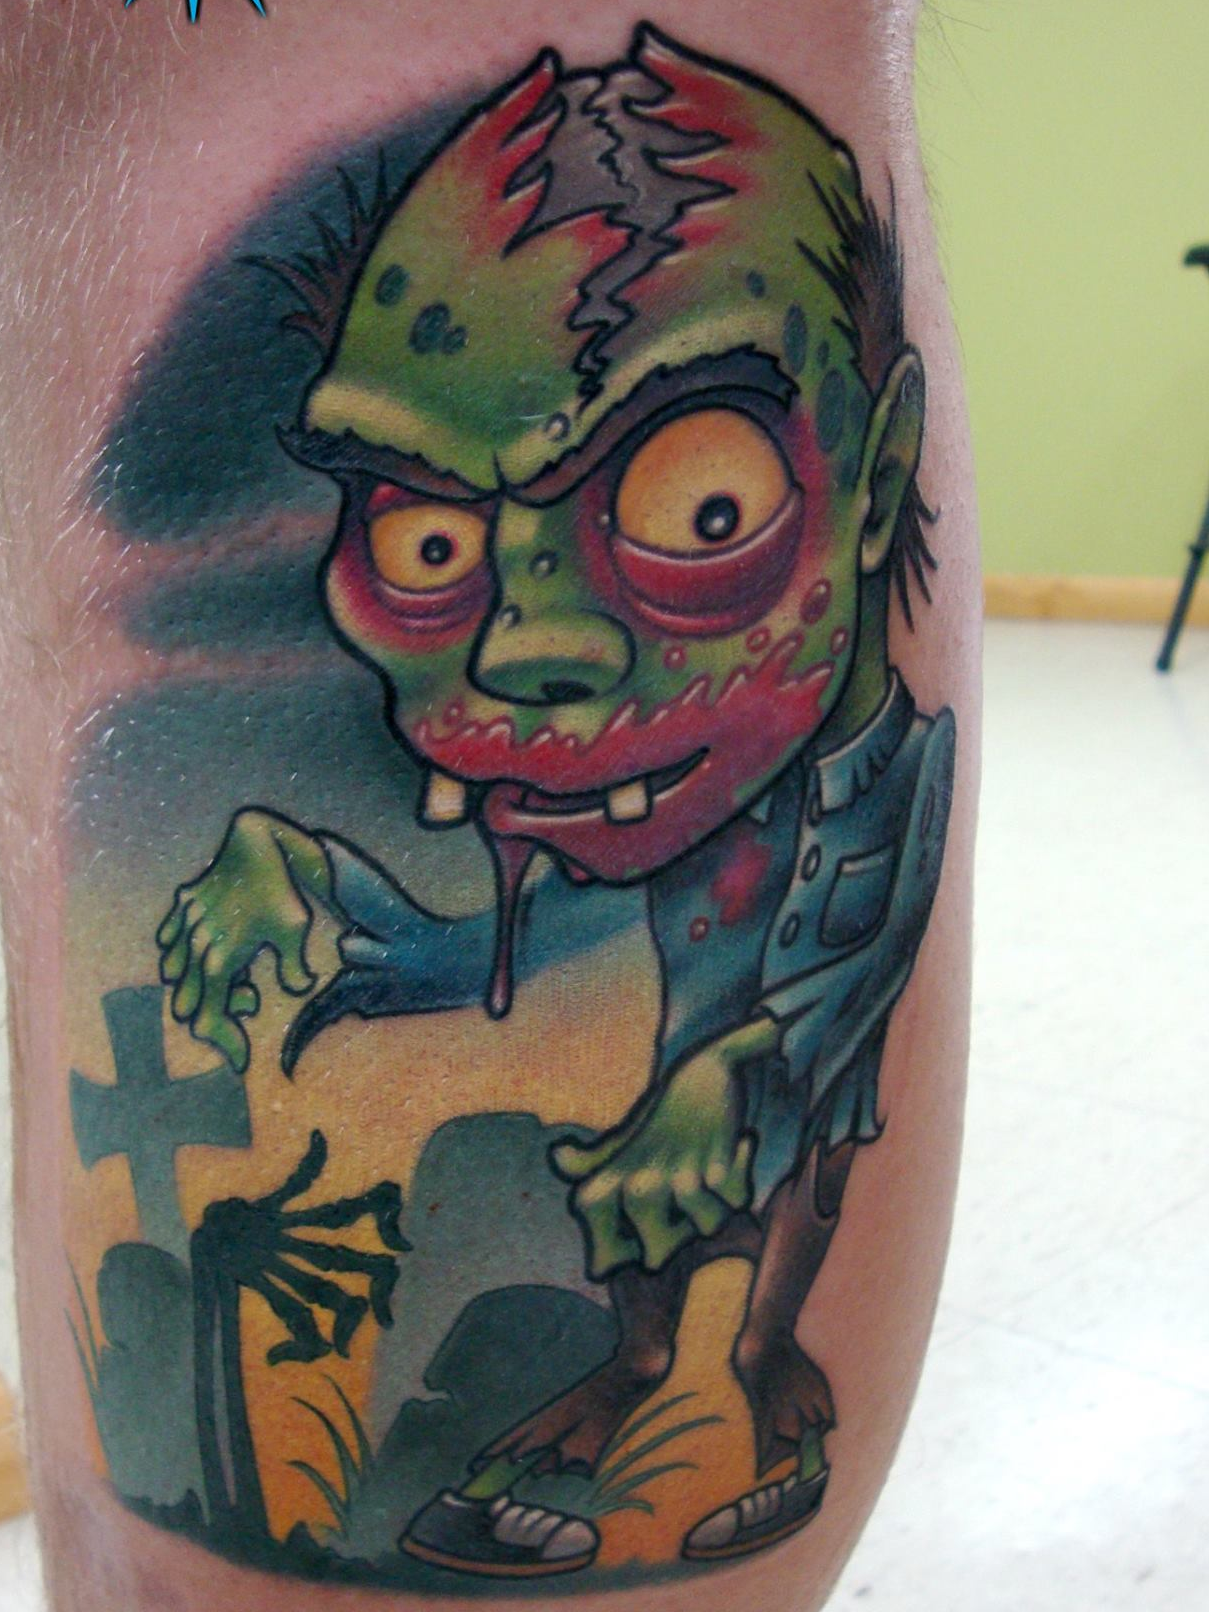 Zombie Tattoo done by Cracker Joe Swider in Connecticut